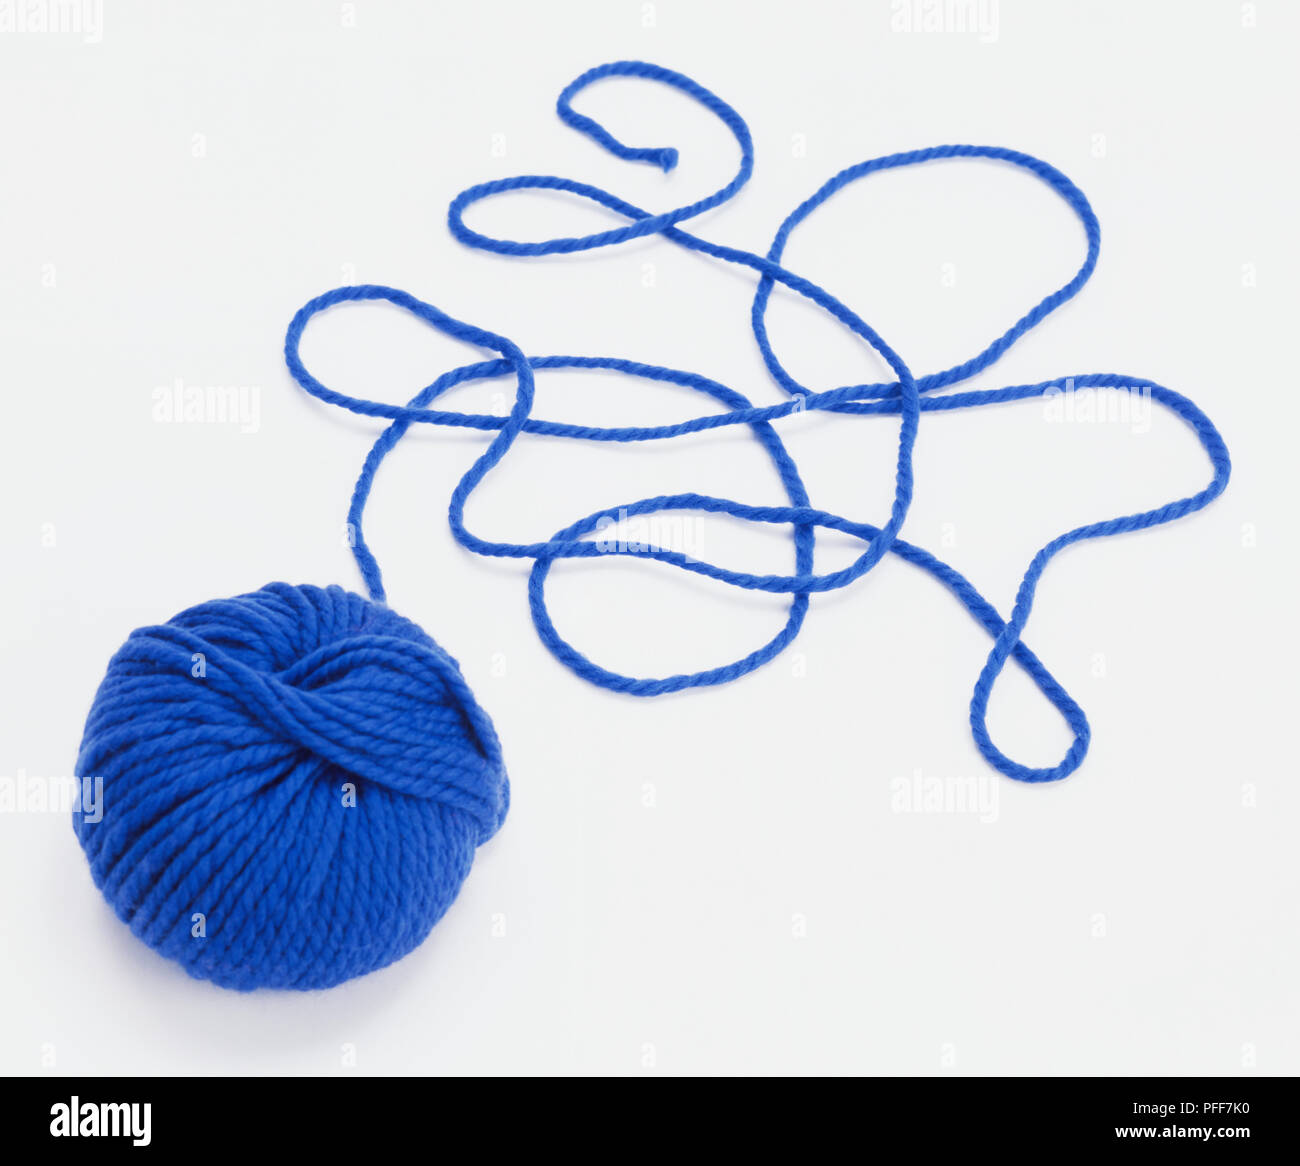 Ball of blue wool, perfect round ball, unravelled piece lying in a tangle on ground. Stock Photo